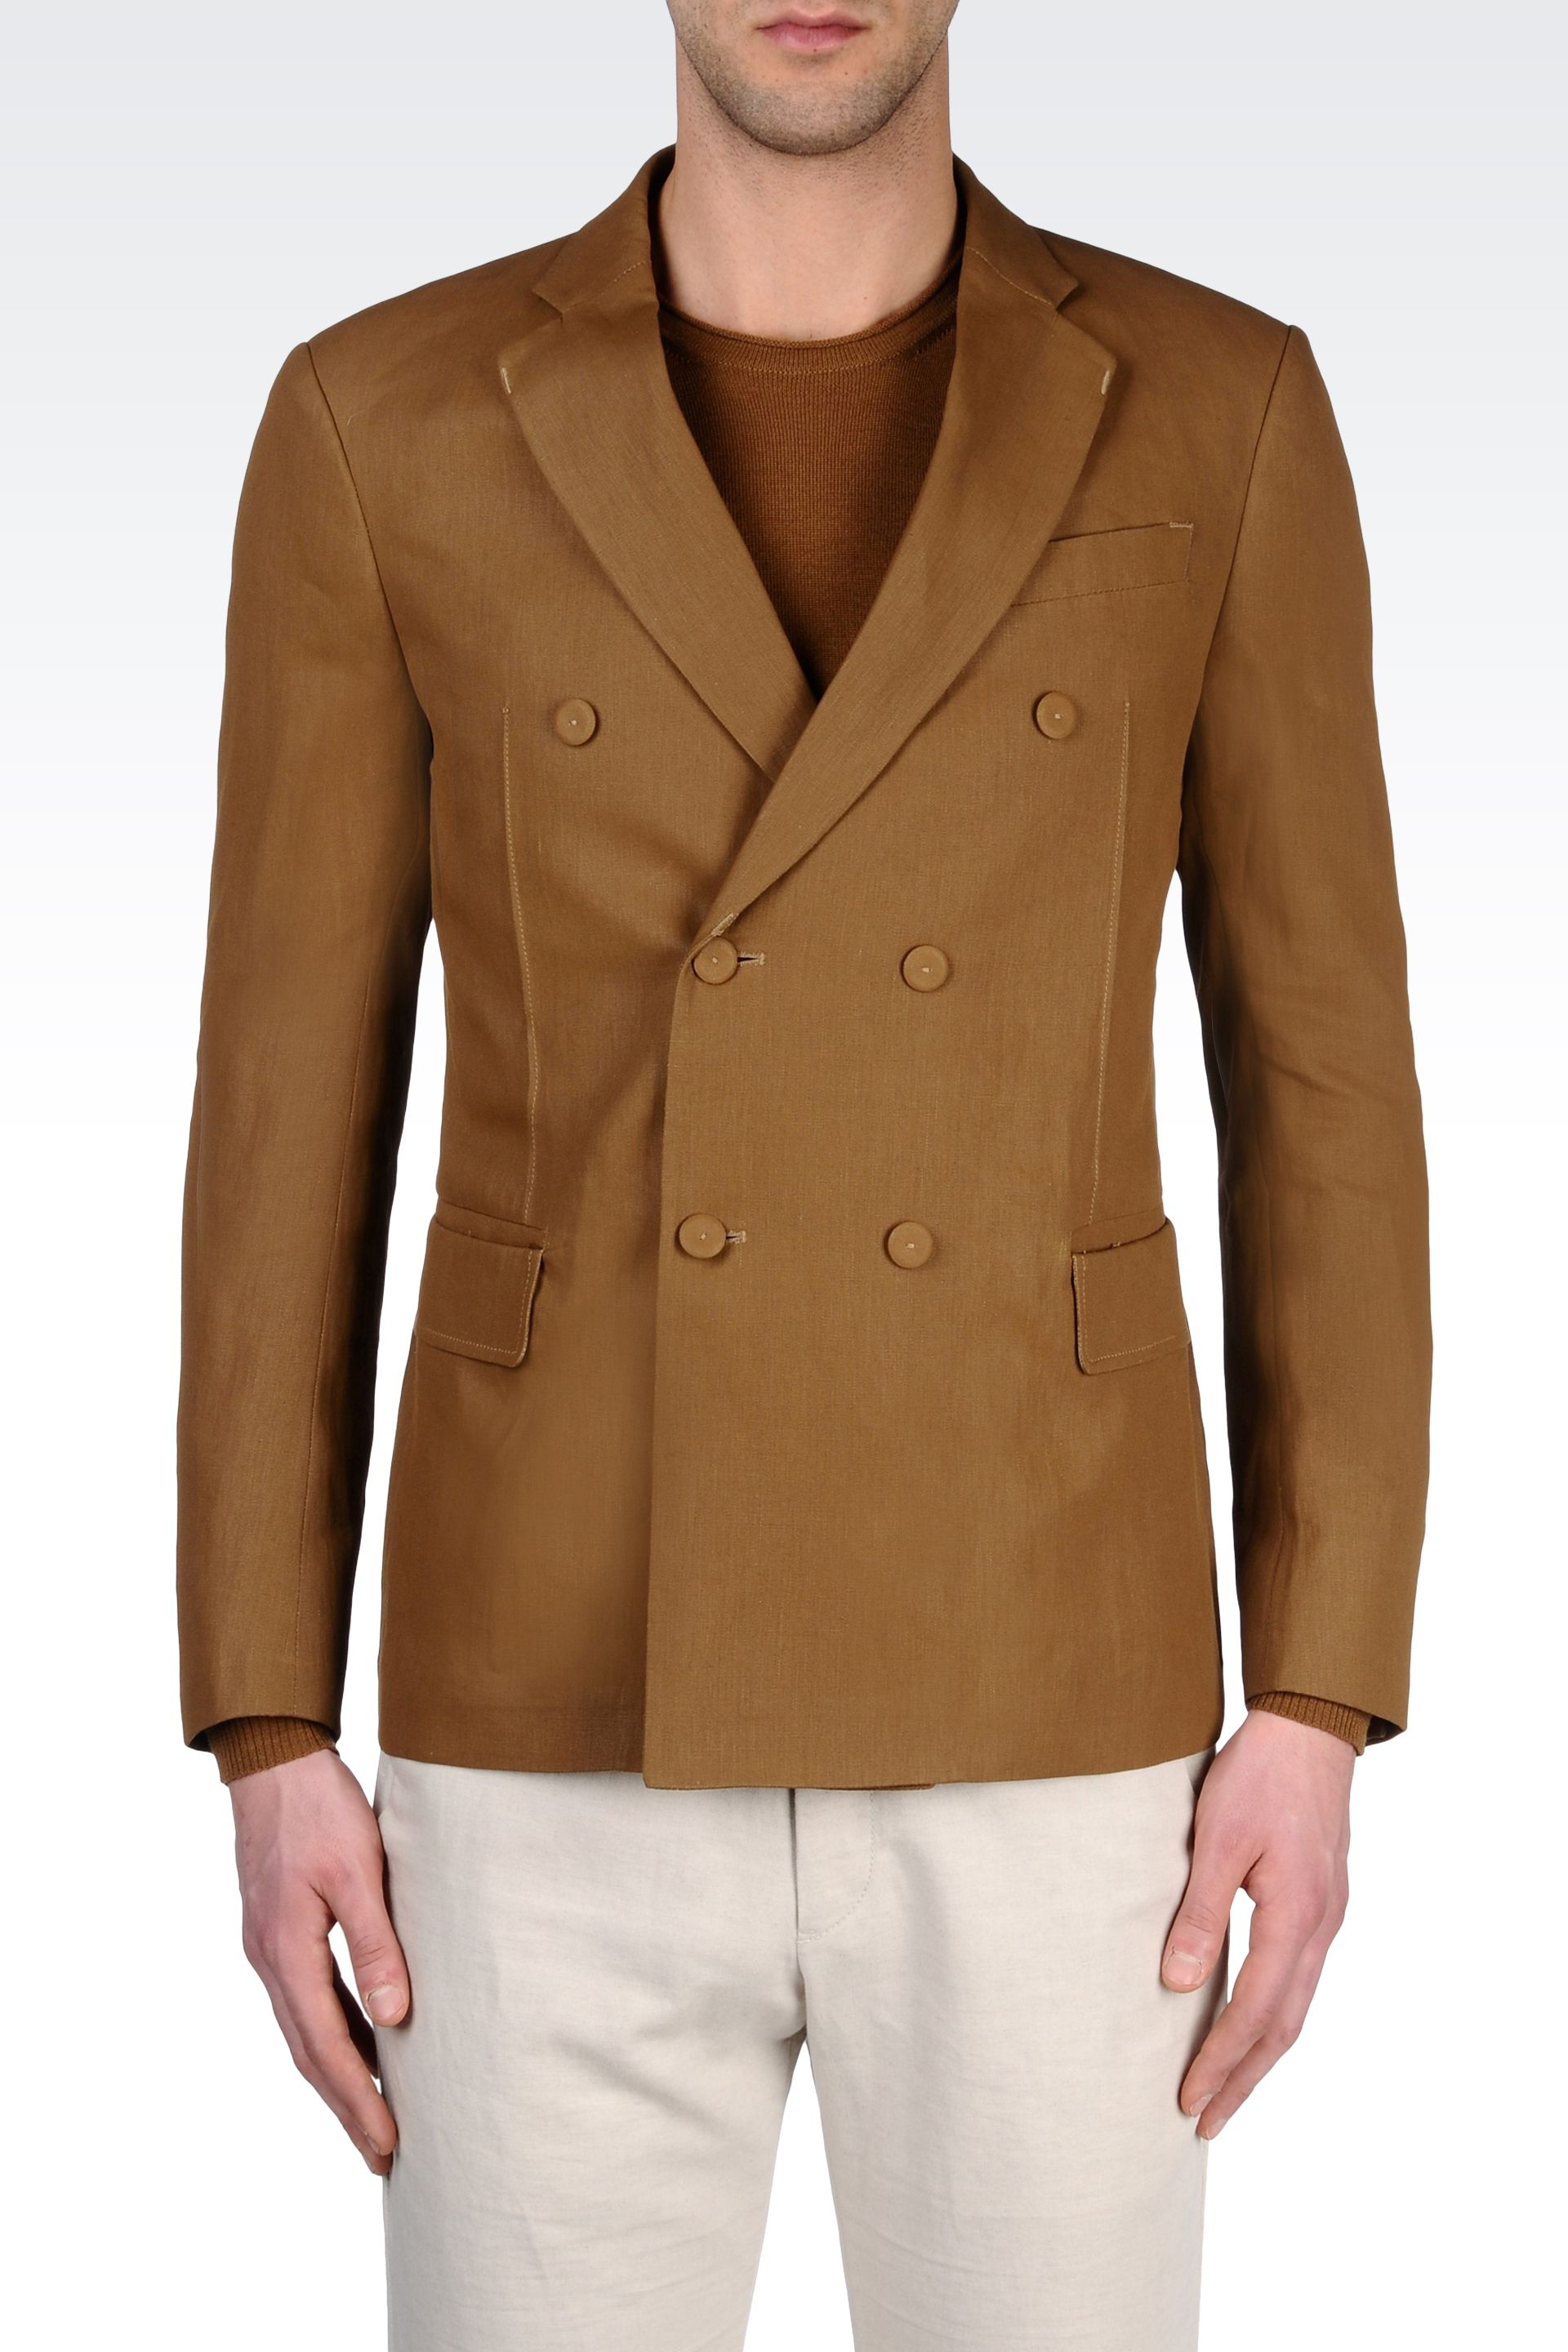 Lyst - Armani Doublebreasted Linen Jacket in Brown for Men